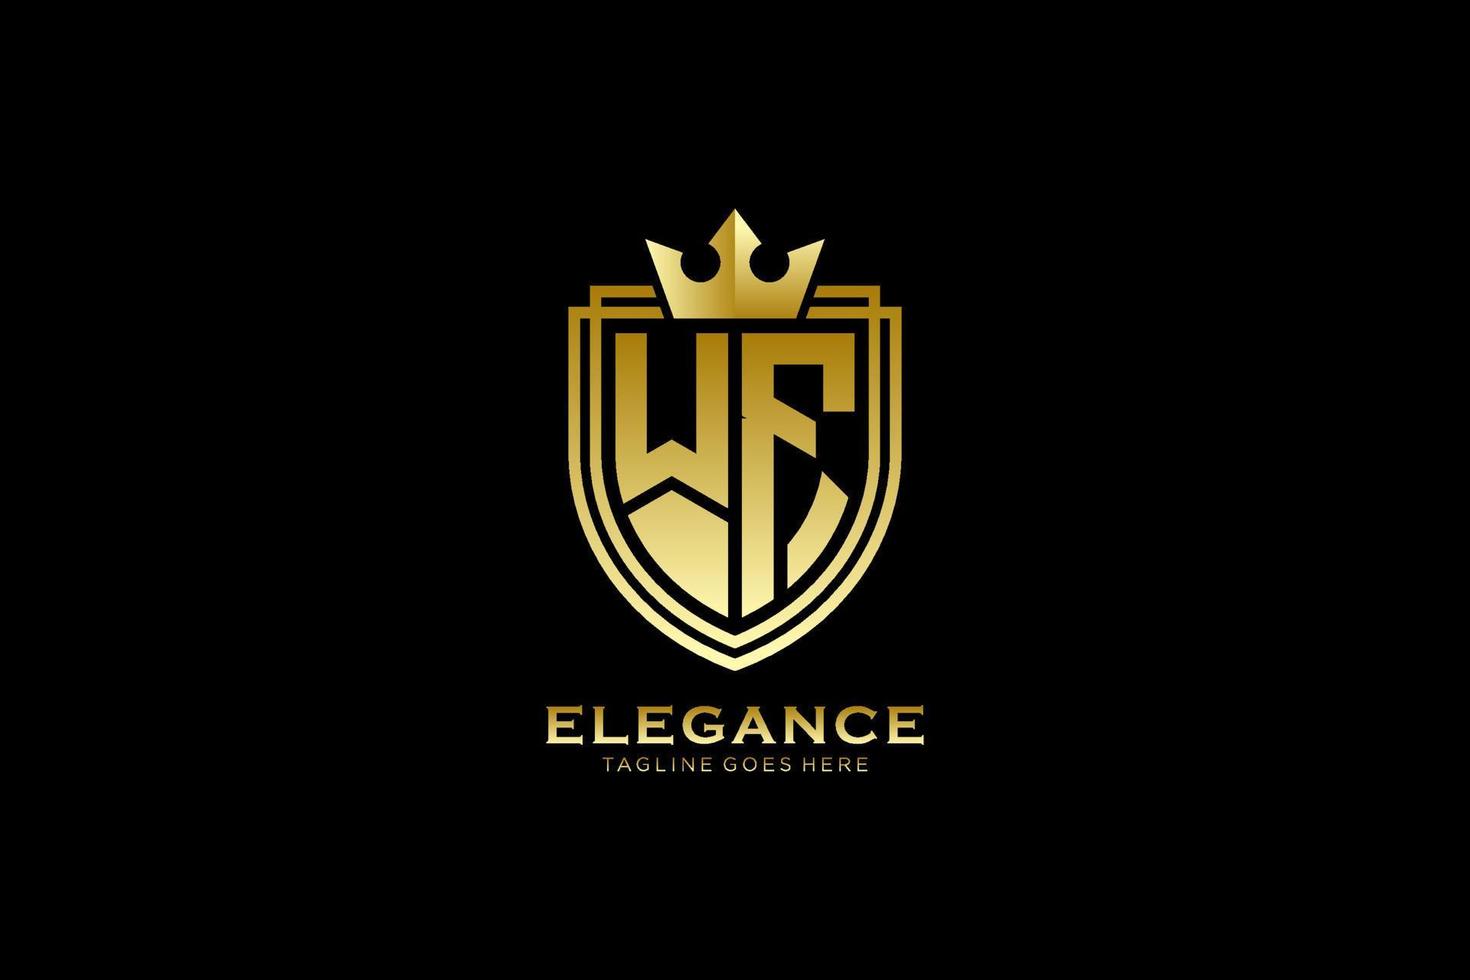 initial WF elegant luxury monogram logo or badge template with scrolls and royal crown - perfect for luxurious branding projects vector